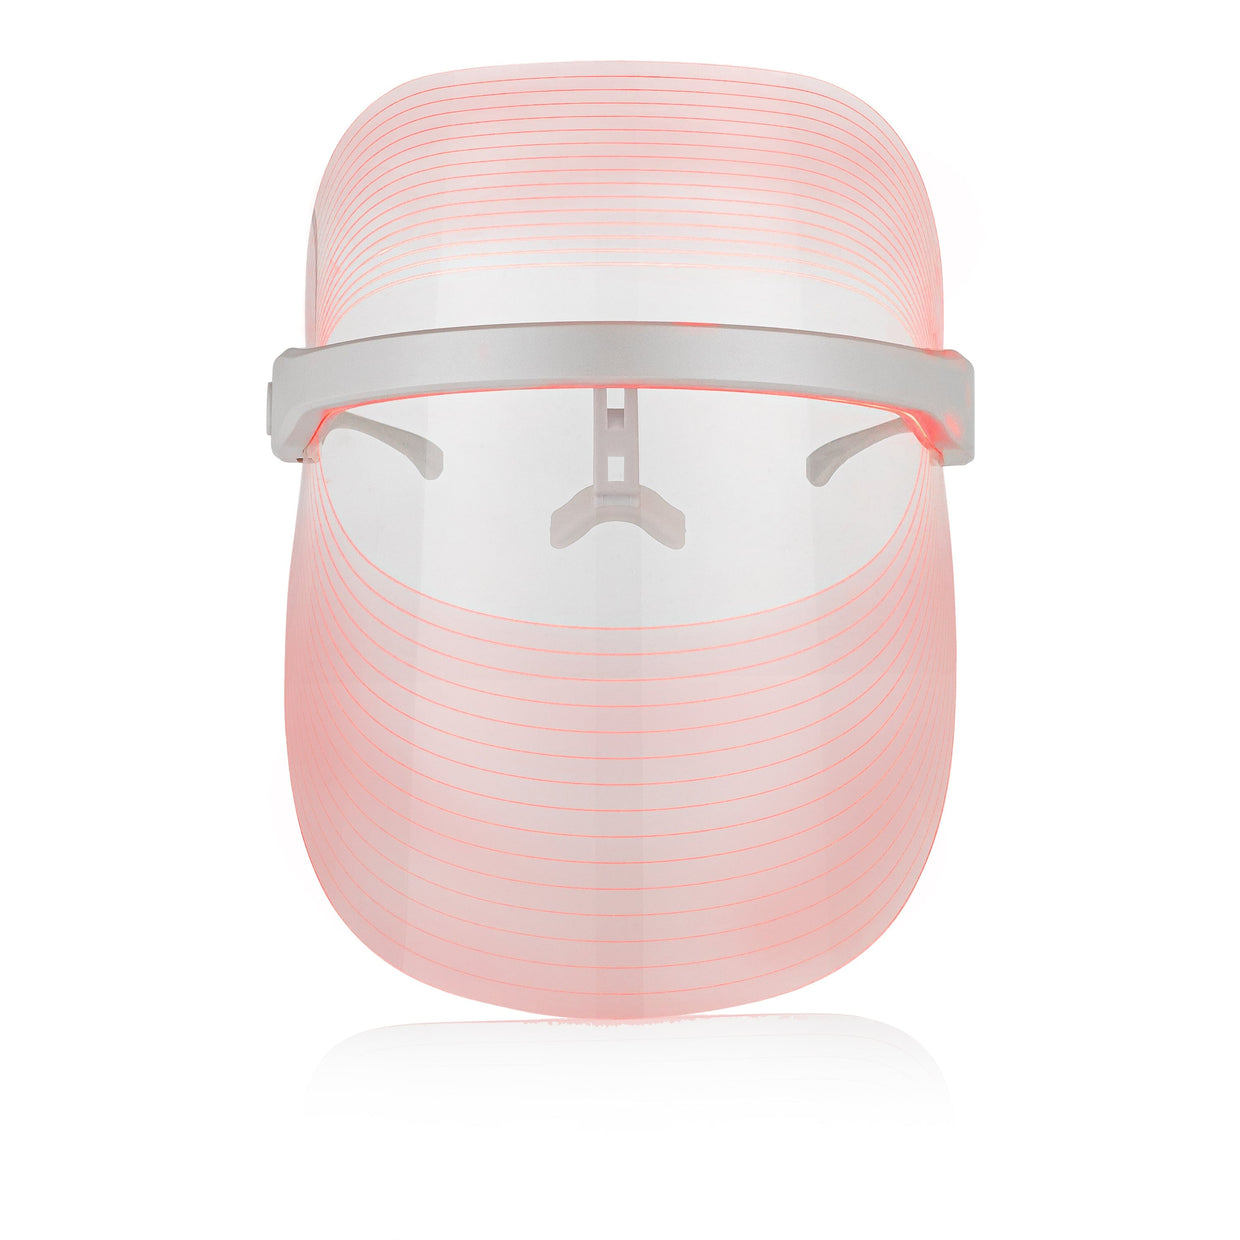 Solaris Laboratories NY How To Glow 4 Color LED Light Therapy Mask Solaris Laboratories NY Shop at Exclusive Beauty Club